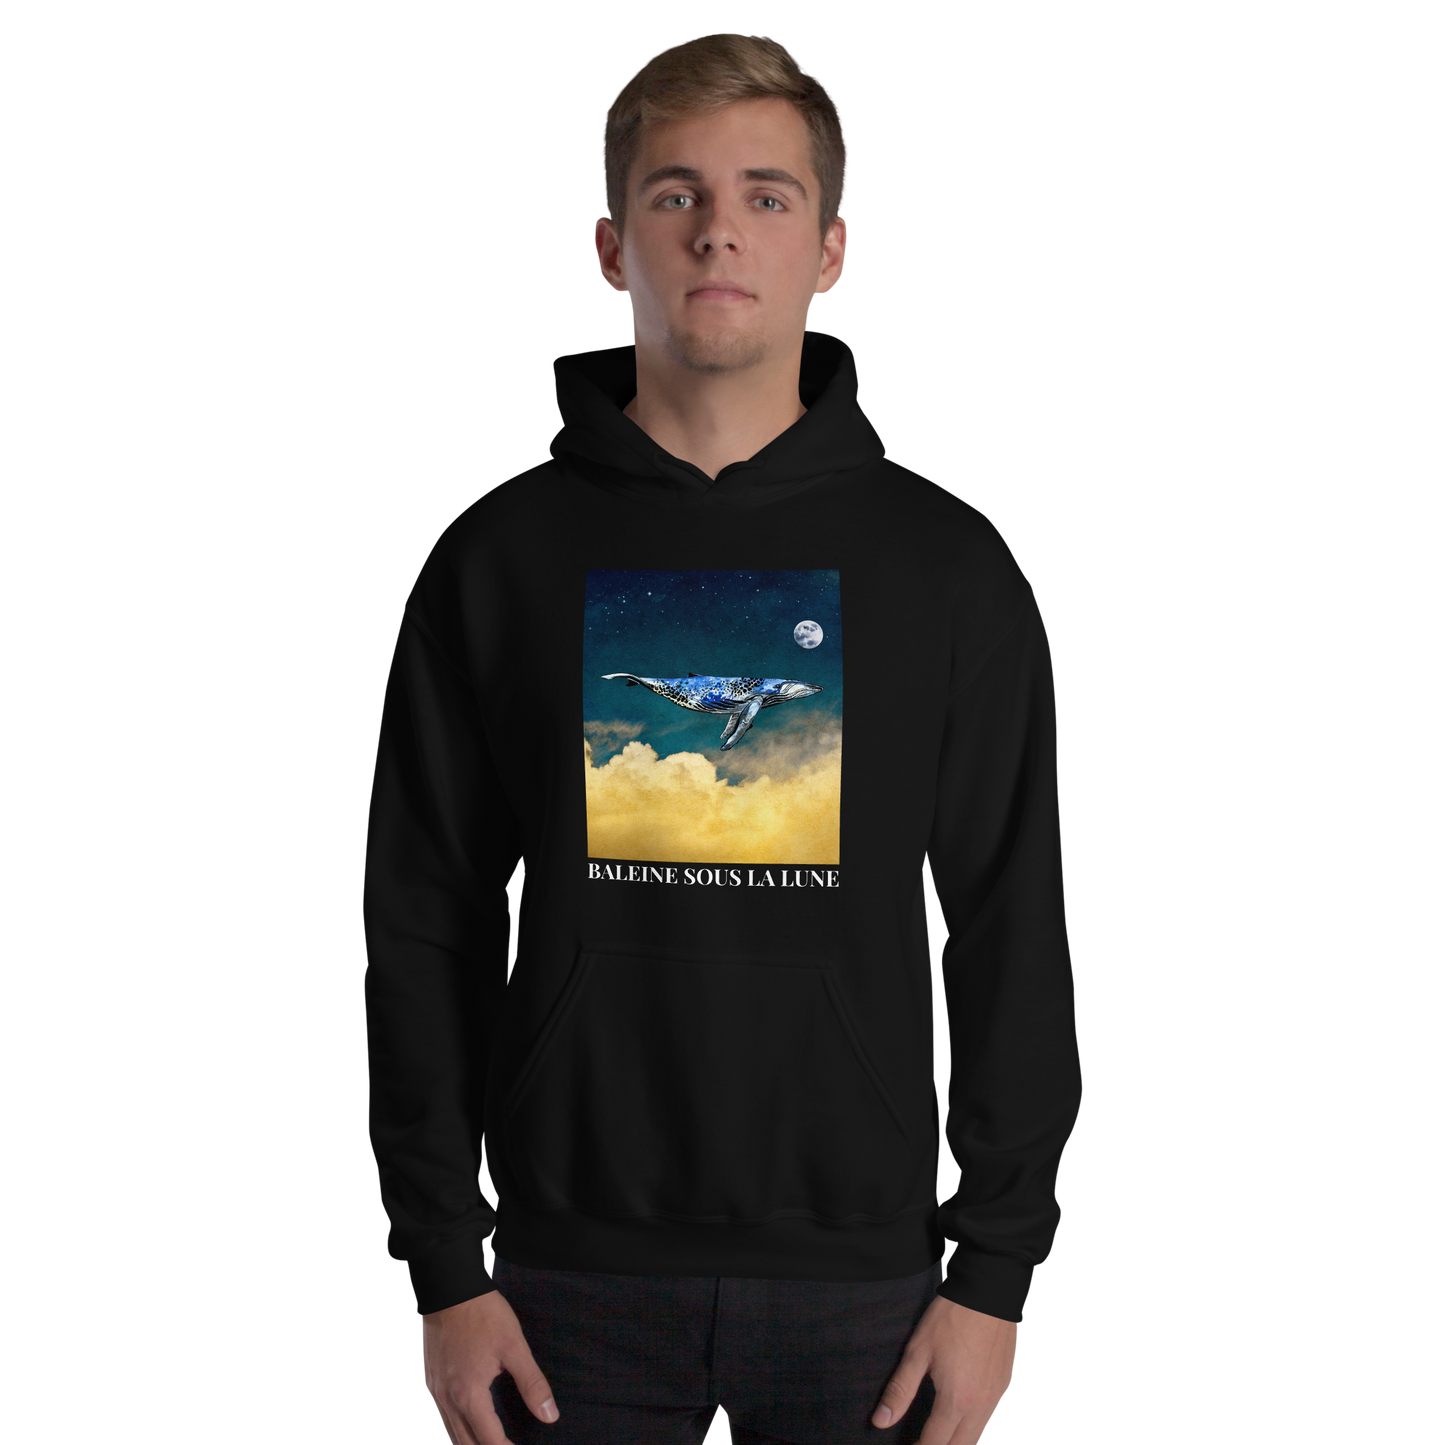 Man wearing a Black Whale Hoodie featuring a charming Whale Under The Moon graphic on the chest - Cool Graphic Whale Hoodies - Boozy Fox